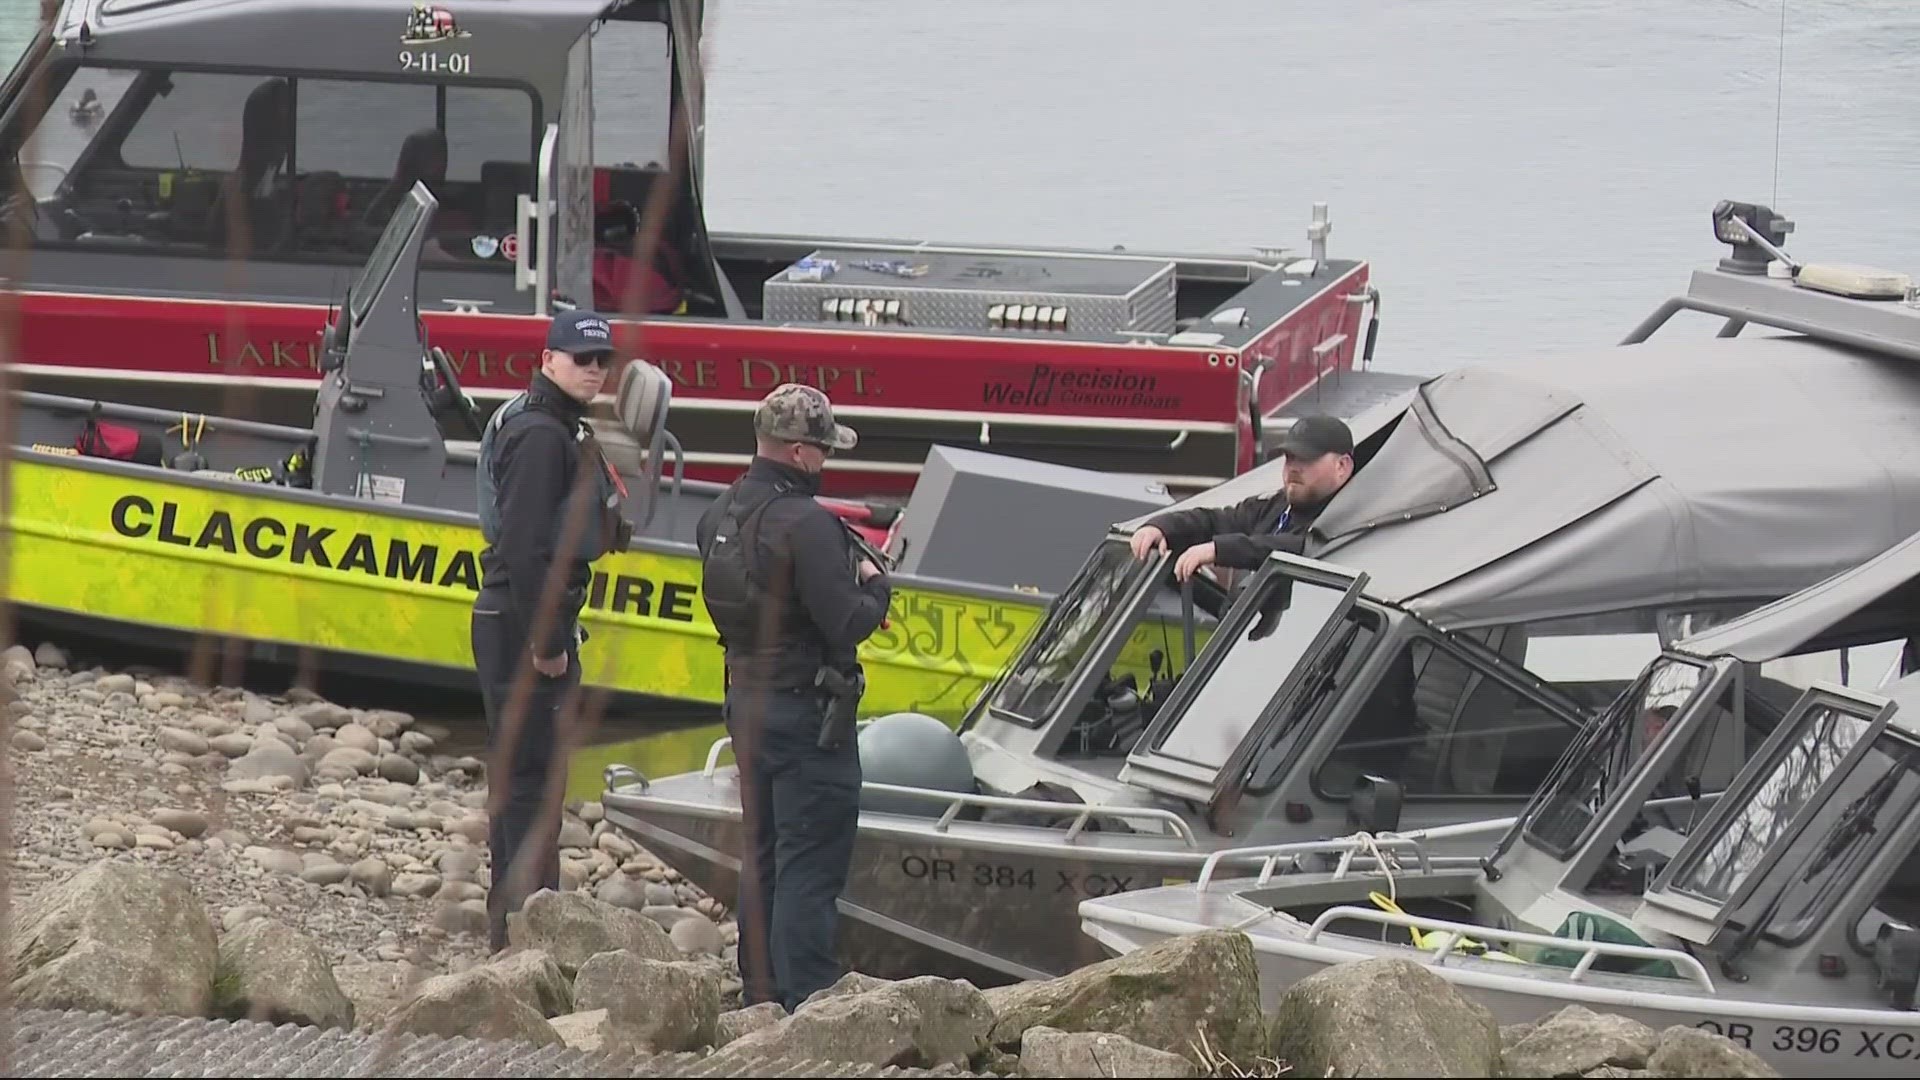 Police said a caller saw a SUV go into the water with a person in the vehicle at Clackamette RV Park.